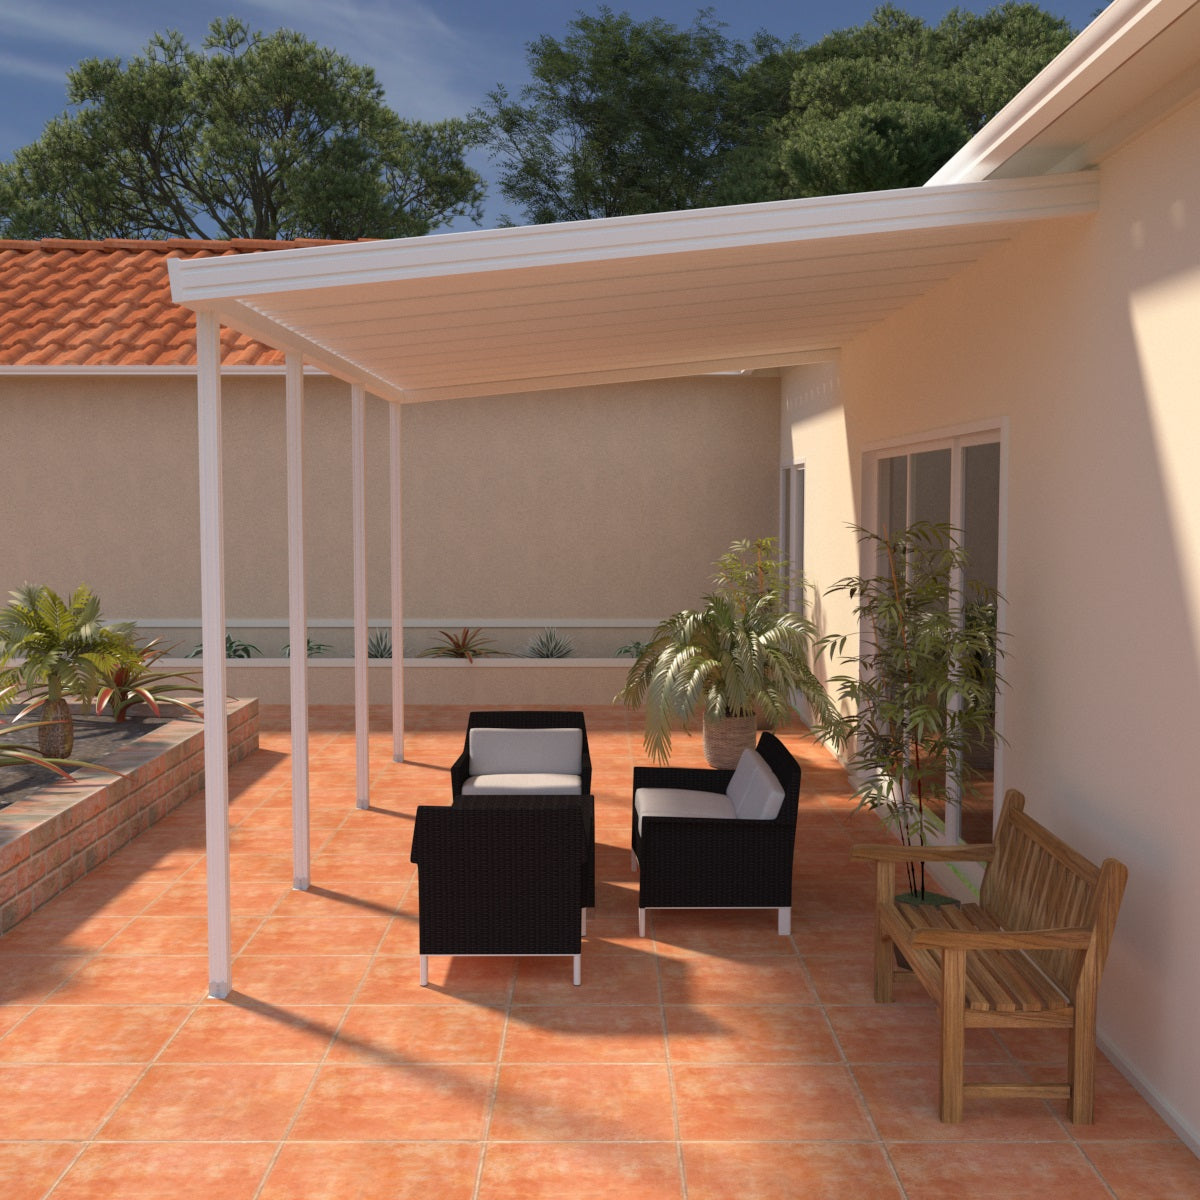 08 ft. Deep x 20 ft. Wide White Attached Aluminum Patio Cover - 4 Posts - (20lb Low/Medium Snow Area)